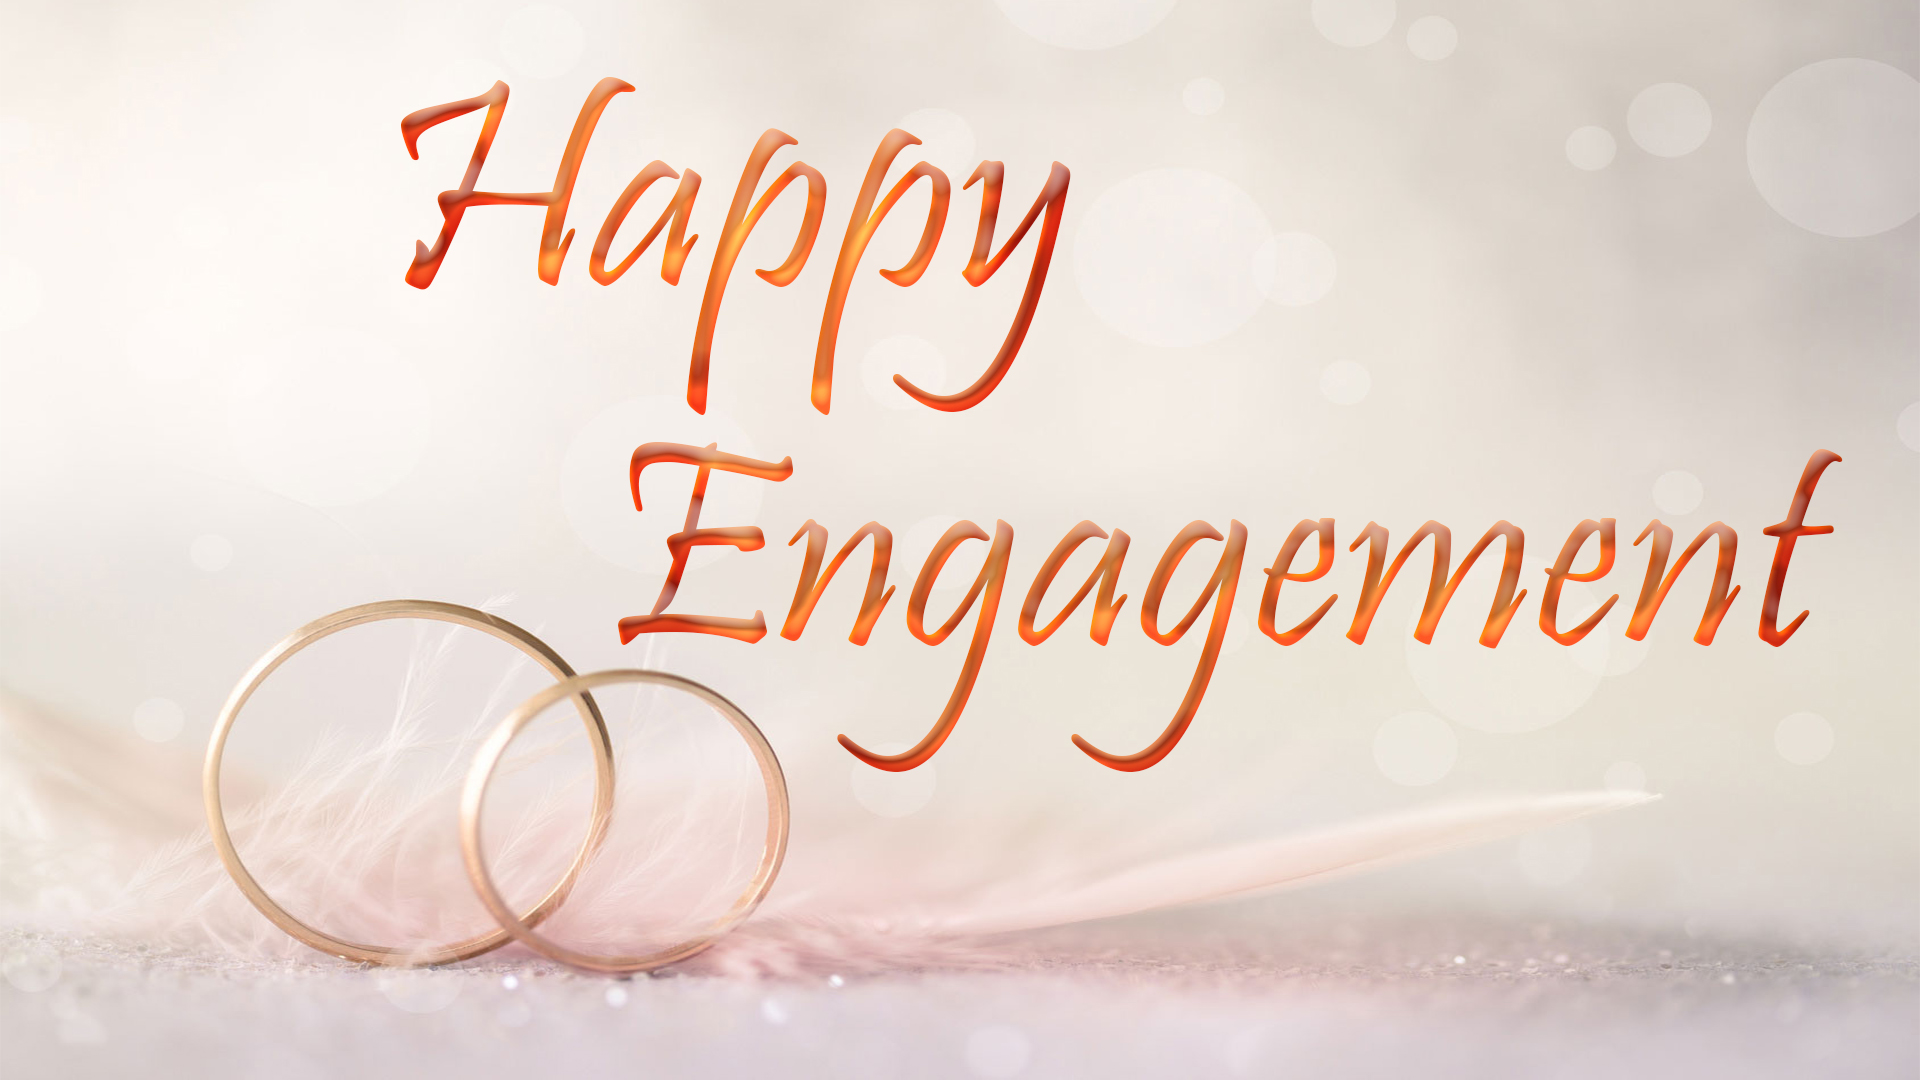 Happy Engagement Images, Pictures & HD Wallpapers